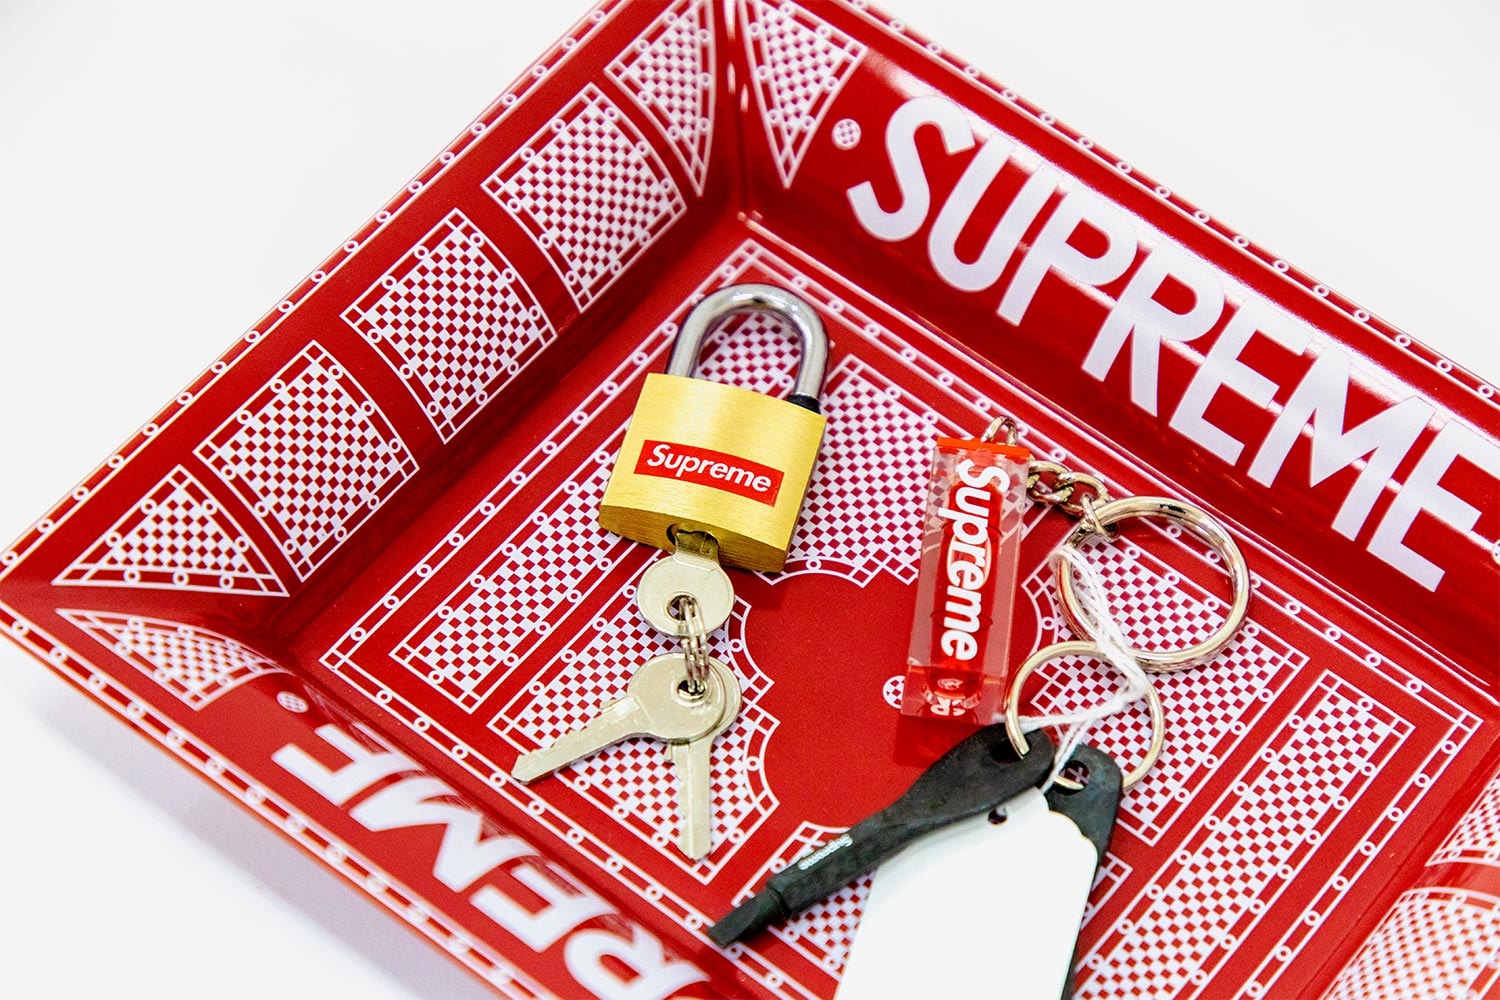 Meet Yukio Takahashi: The Collector behind the 1300-piece Supreme  Collection, Interviews